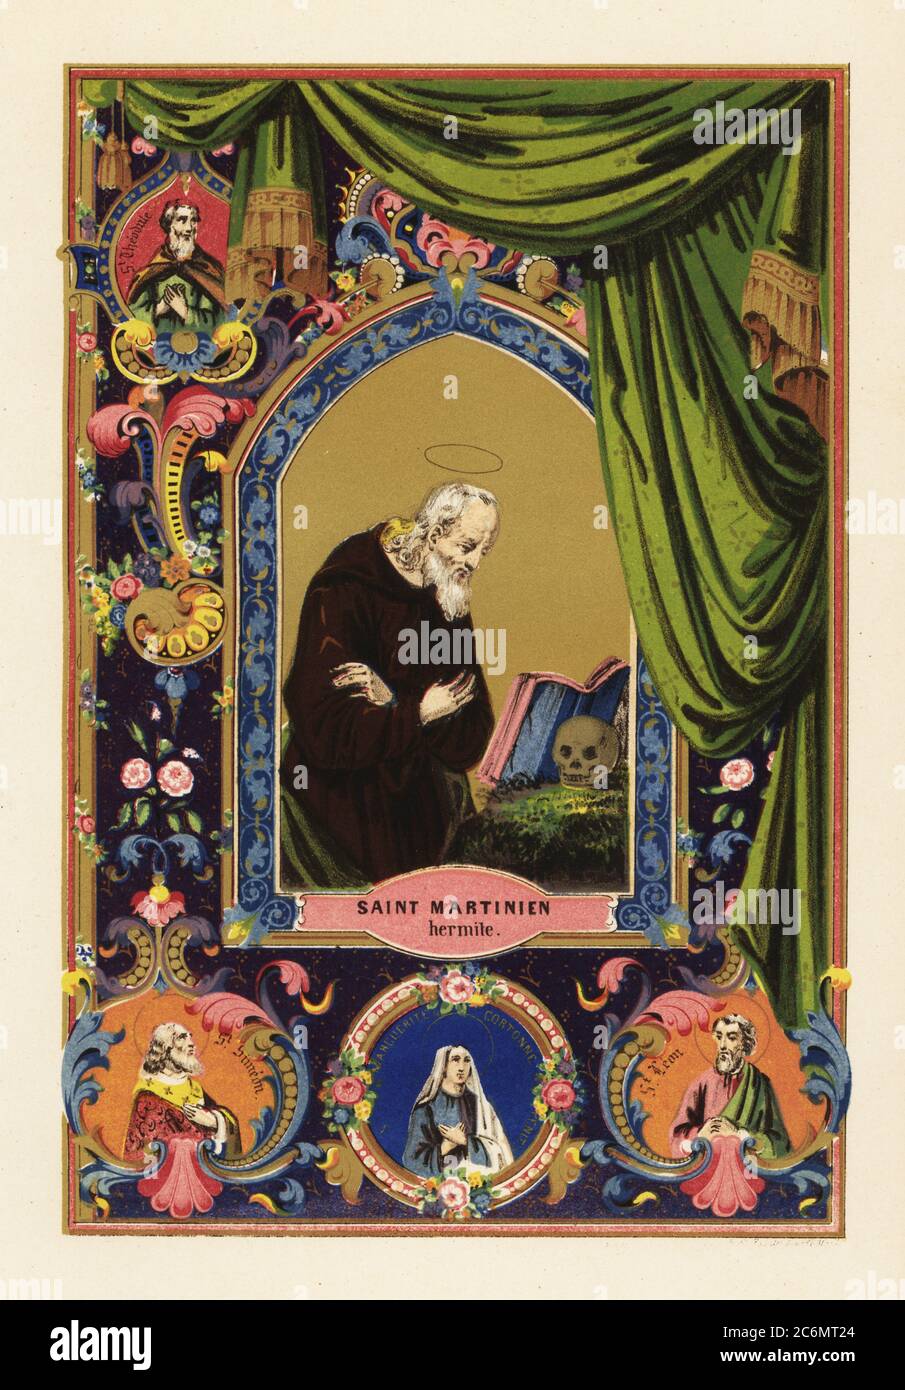 Portrait of Saint Martinian, hermit of Caesarea in Palestine, with halo, reading Bible leaning against a human skull, within decorative border of curtains and foliage. Vignettes of Saint Theodore of Amasea, Saint Theodule,  martyr Saint Leon, Saint Margaret of Cortona and Saint Simeon. Chromolithograph from Legende Celeste, nouvelle histoire de la Vie des Saints, Celestial Legend, Lives of the Saints, Paul Mellier, Paris, 1845. Chromolithograph by Jules Desportes, professor of lithography at the Institut Royal des Sourds-Muets. Stock Photo